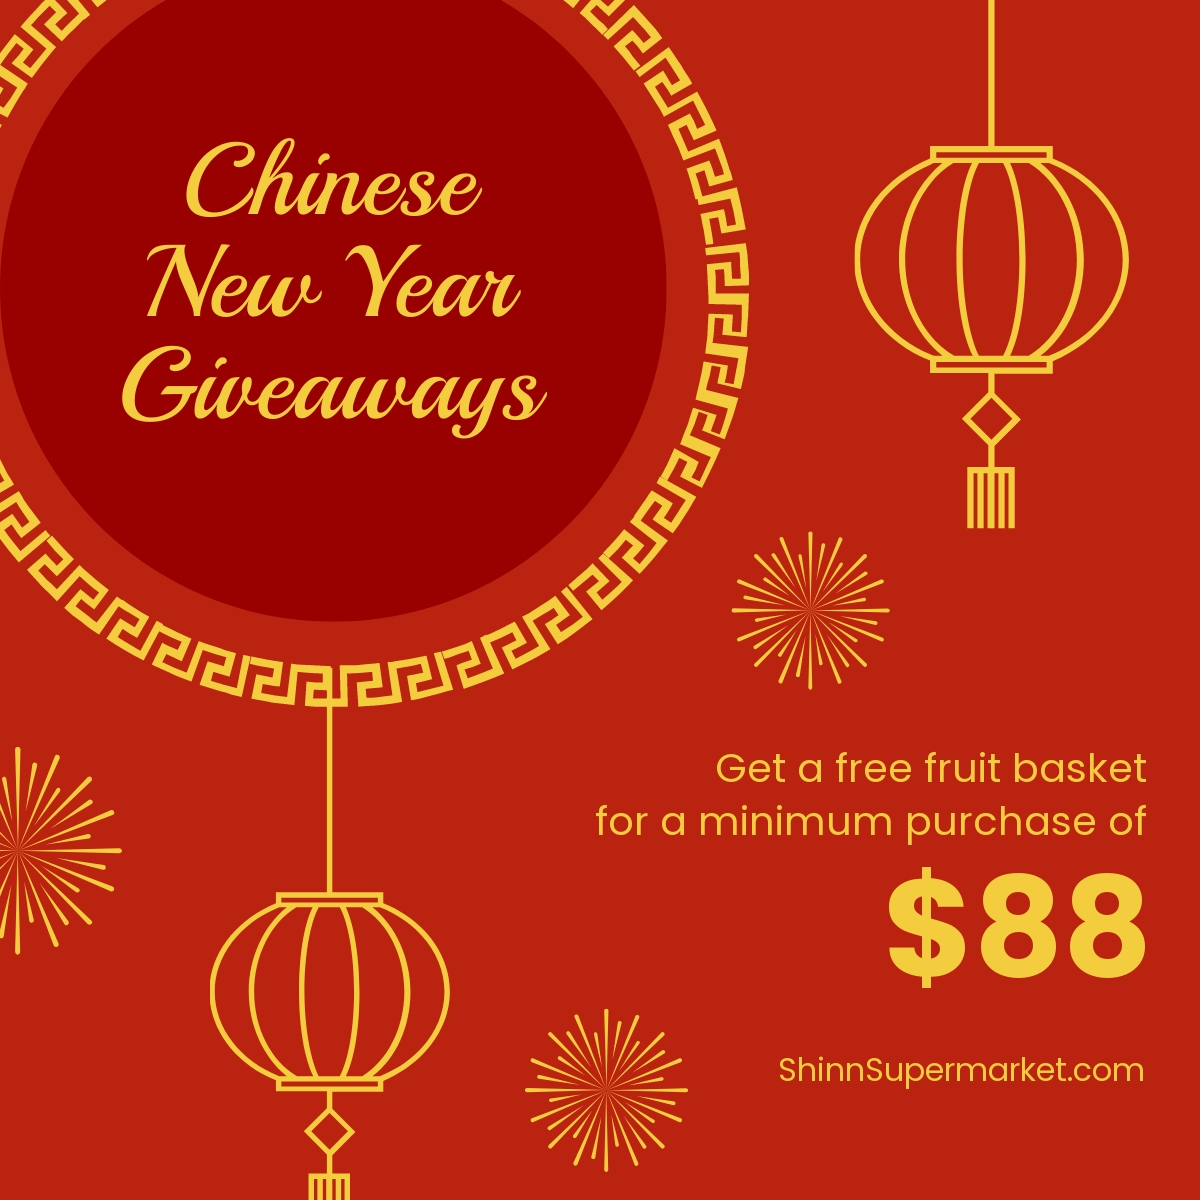 Chinese New Year Giveaway Linkedin Post Template.jpe